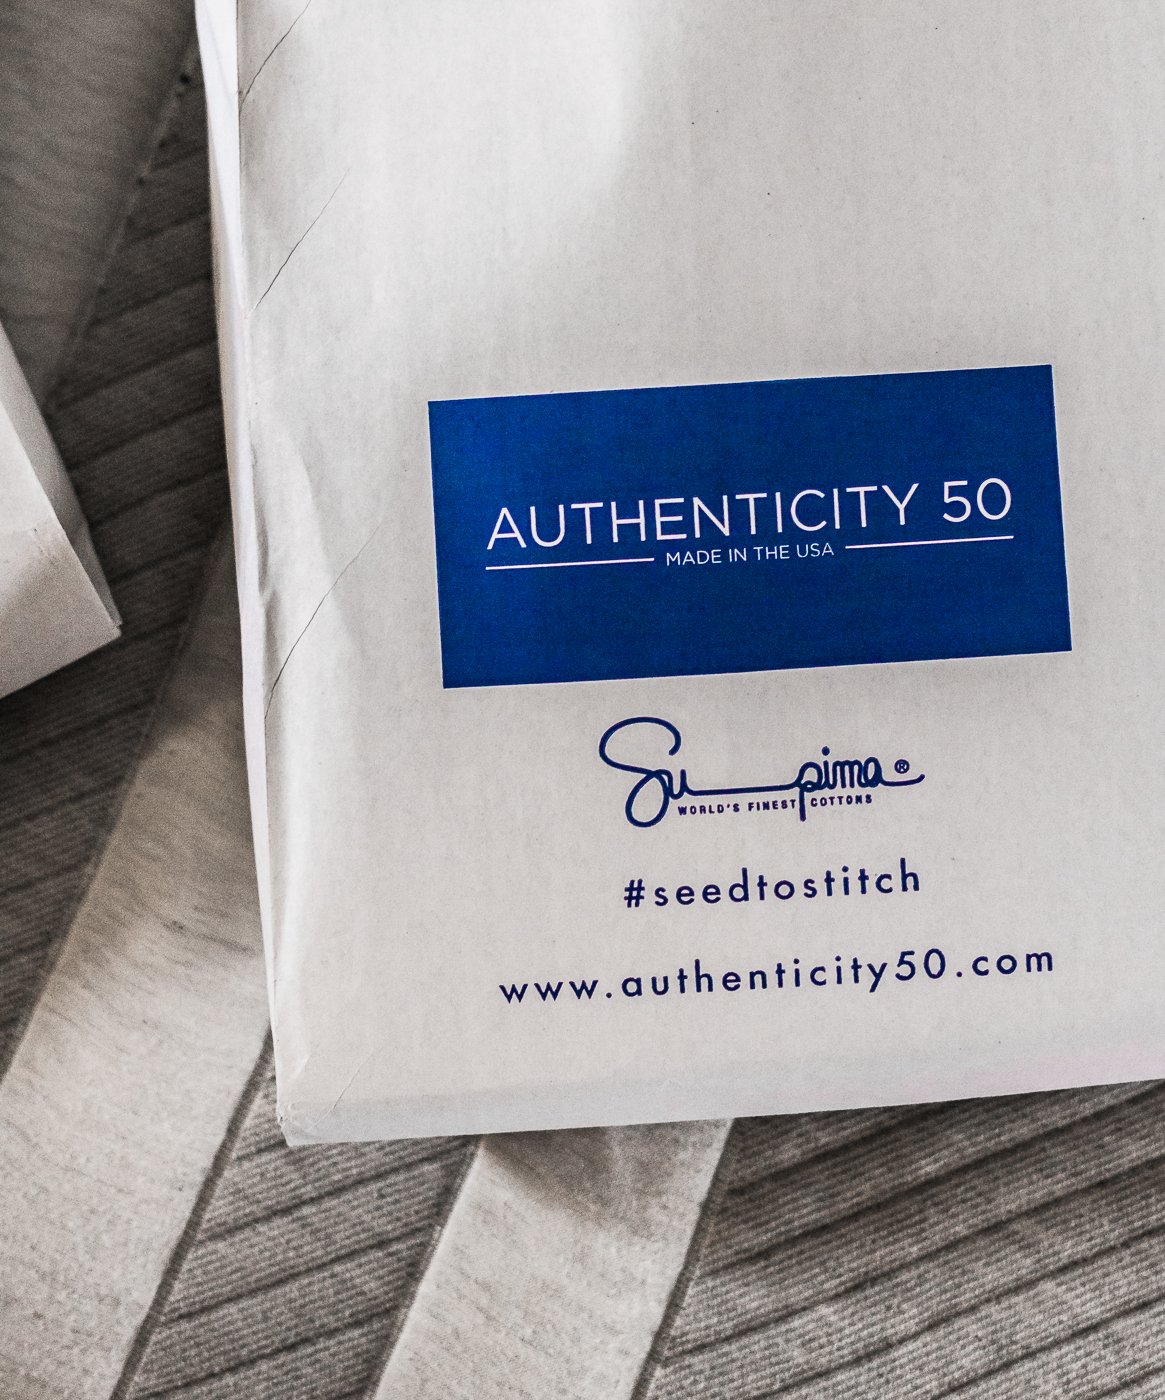 authenticity 50, authenticity 50 bedding, made in america bedding, spring cleaning tips, bedroom spring cleaning